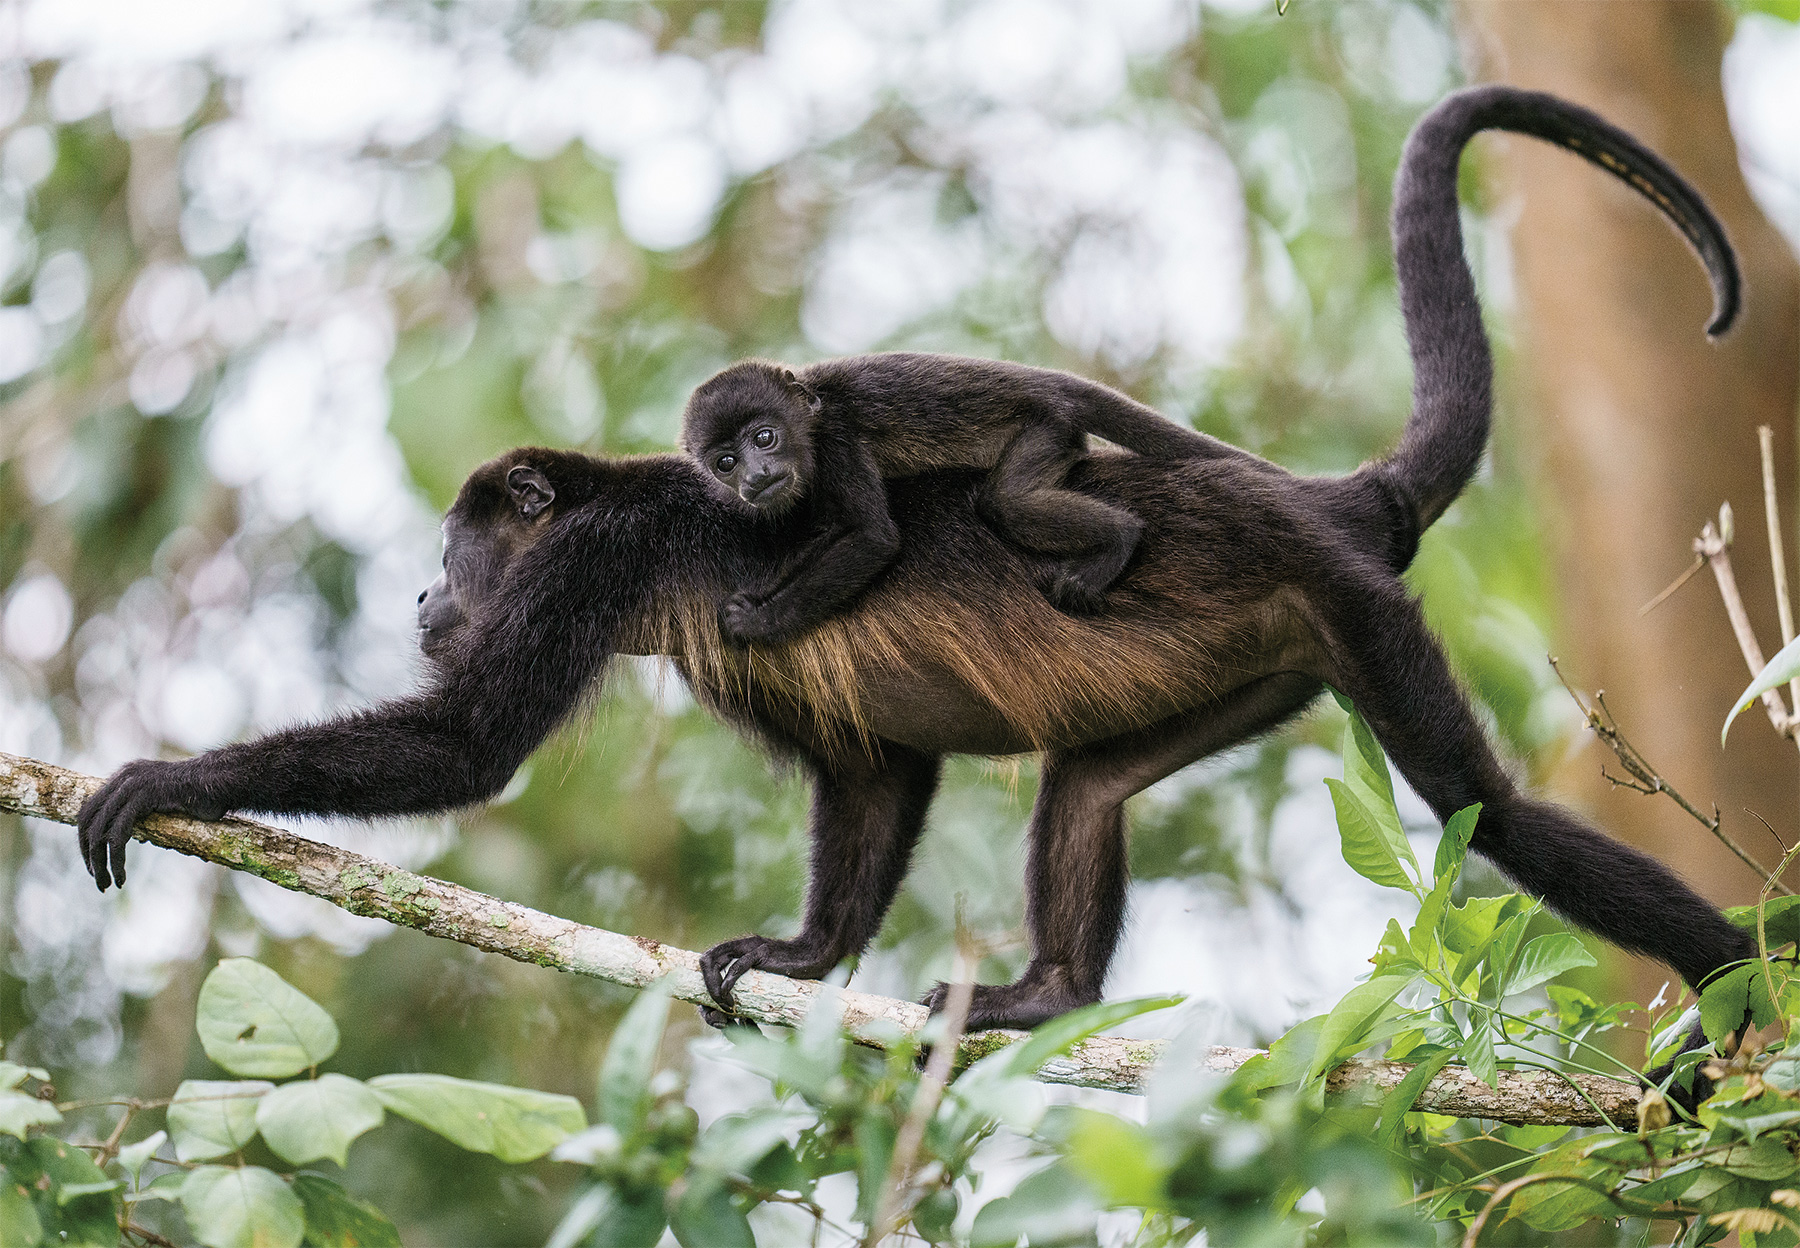 A mother monkey walks across a branch with her child clinging onto her.